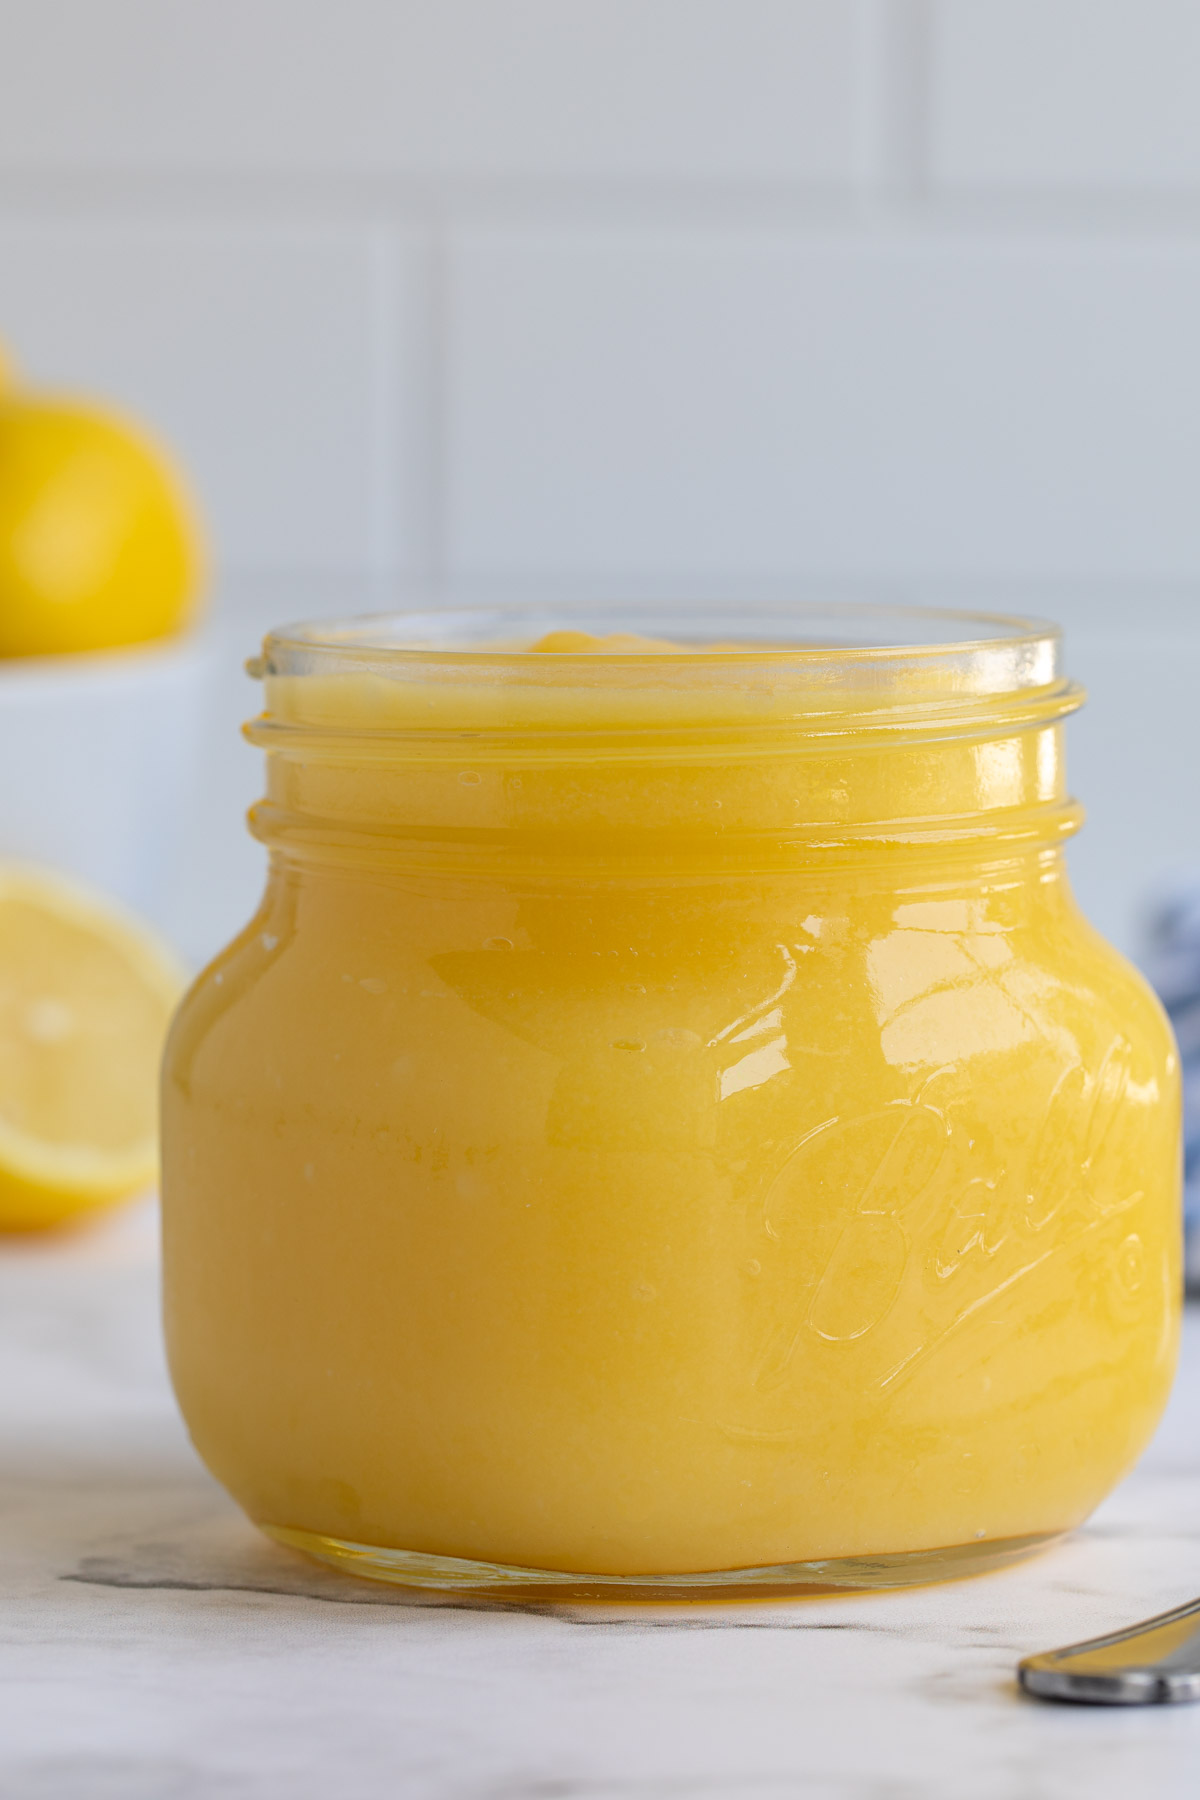 Front view of a pint jar of lemon curd by a spoon.